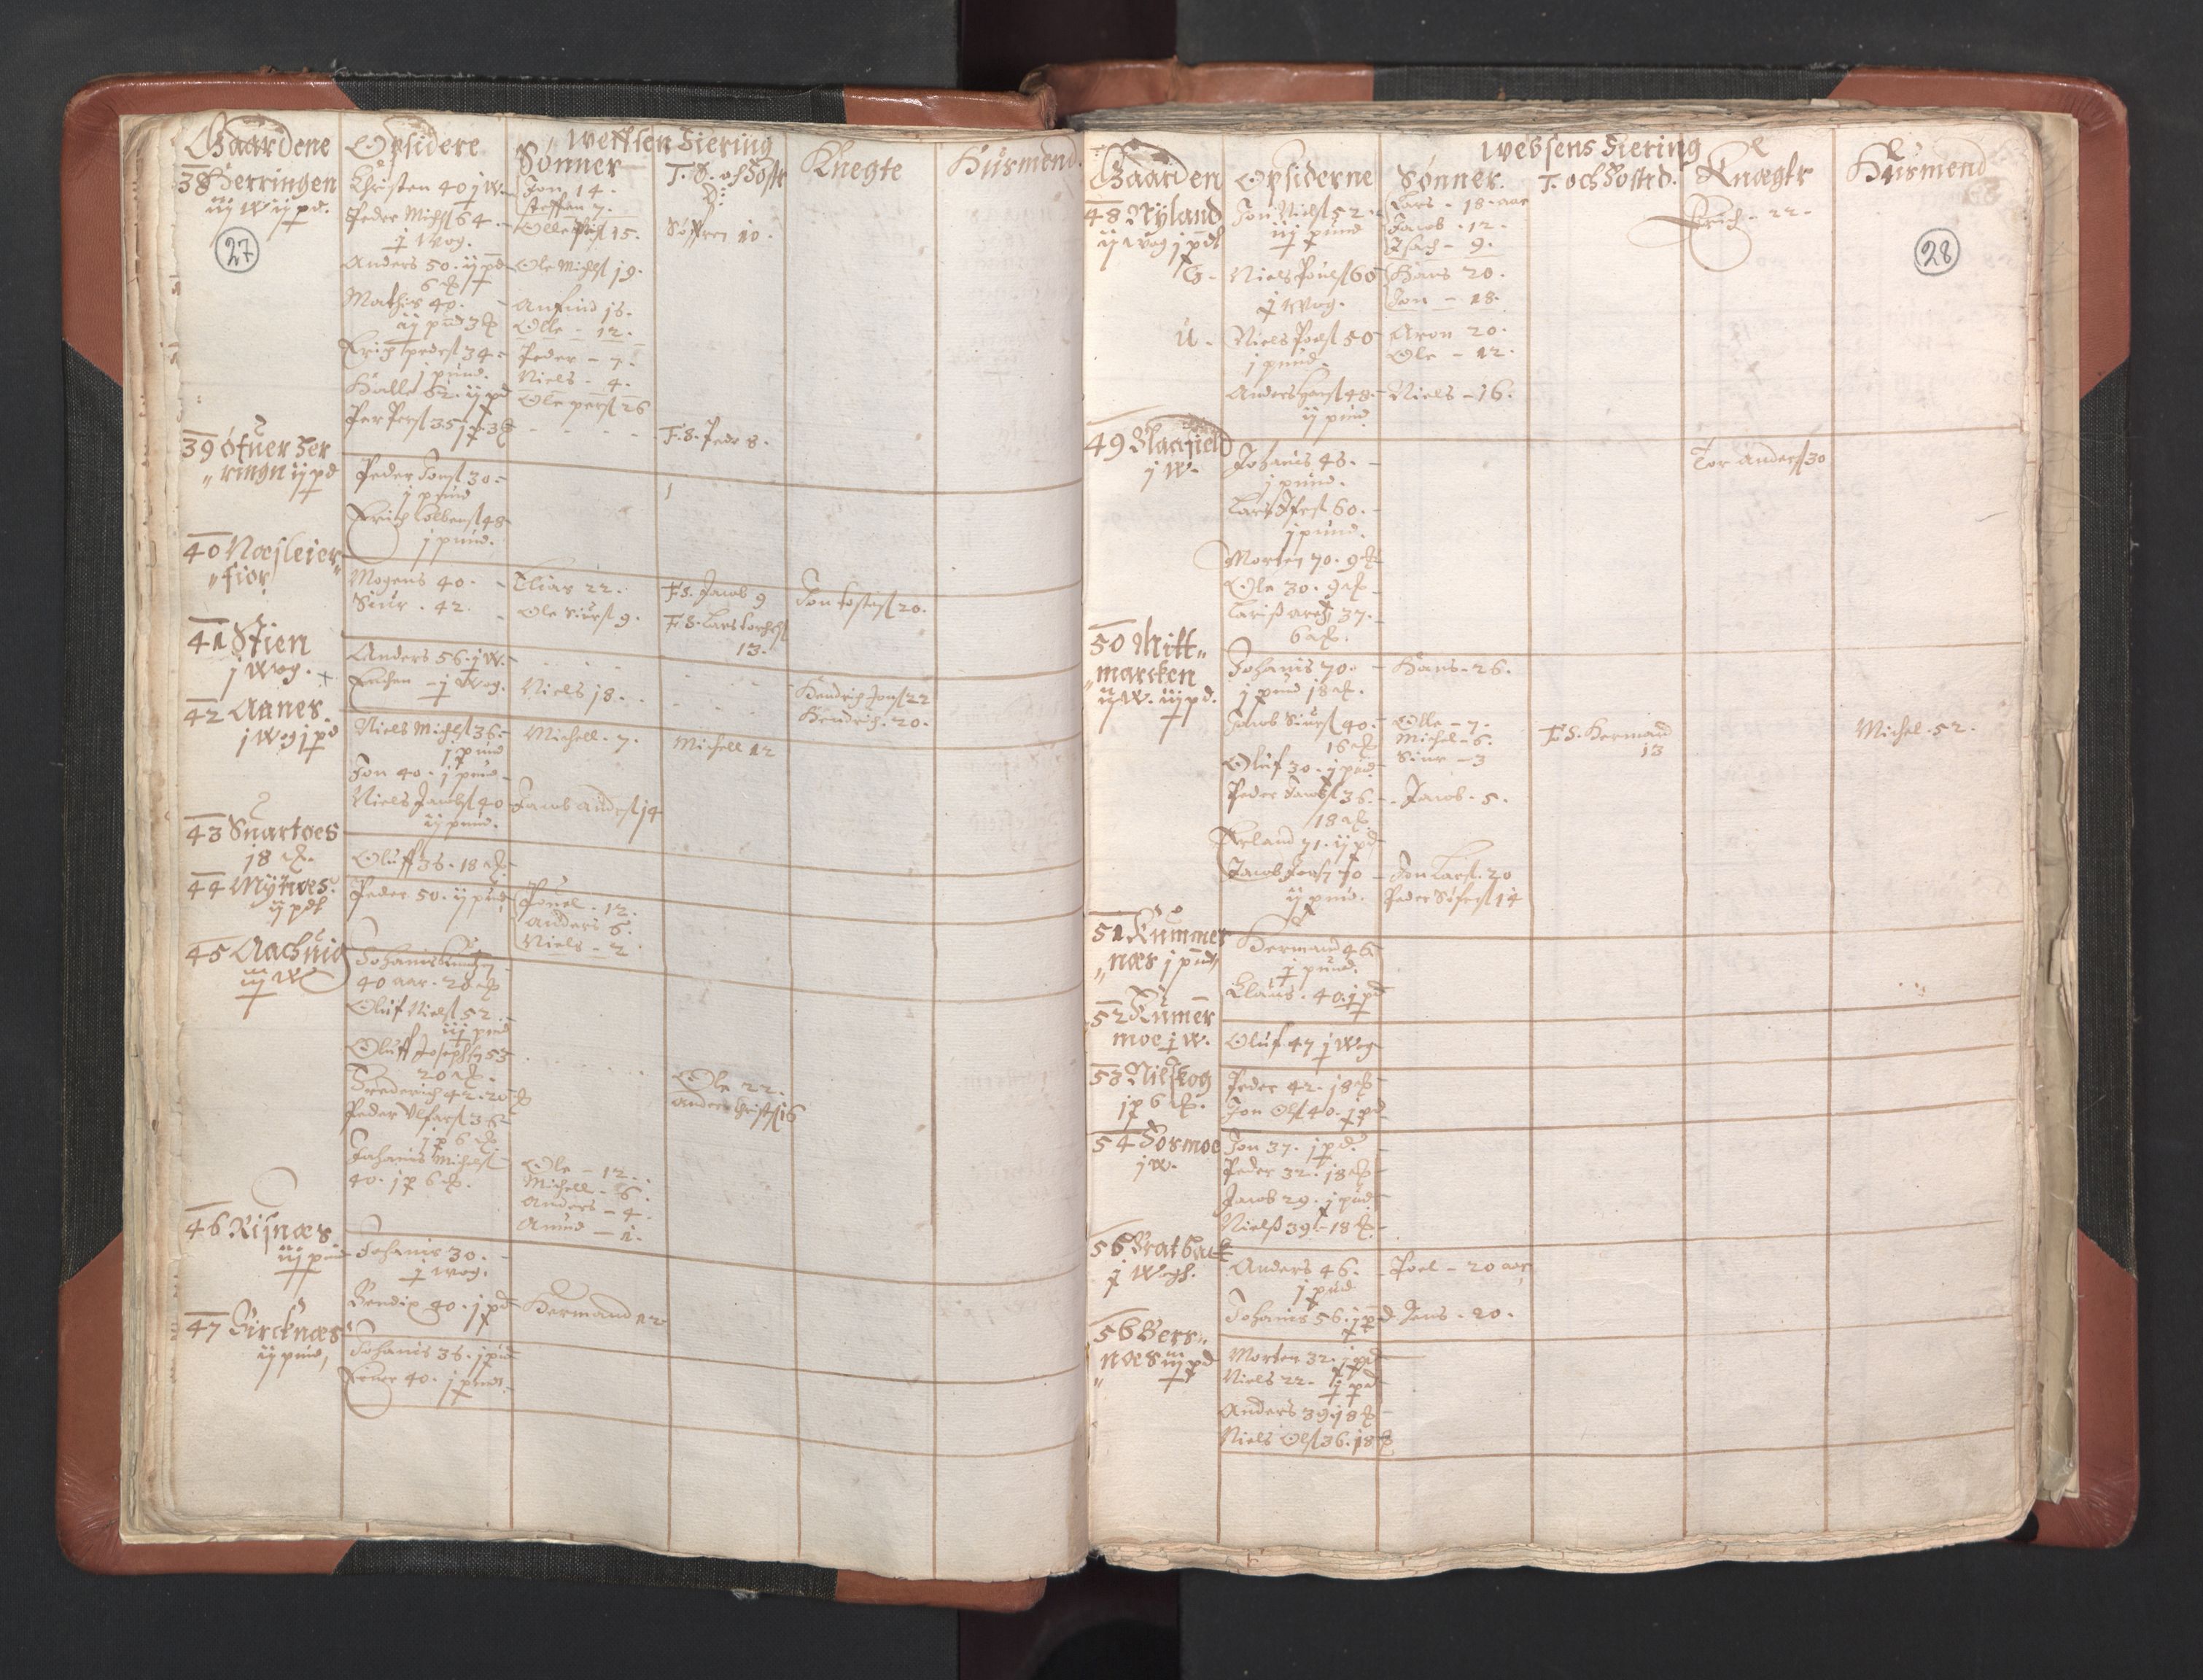 RA, Vicar's Census 1664-1666, no. 35: Helgeland deanery and Salten deanery, 1664-1666, p. 27-28